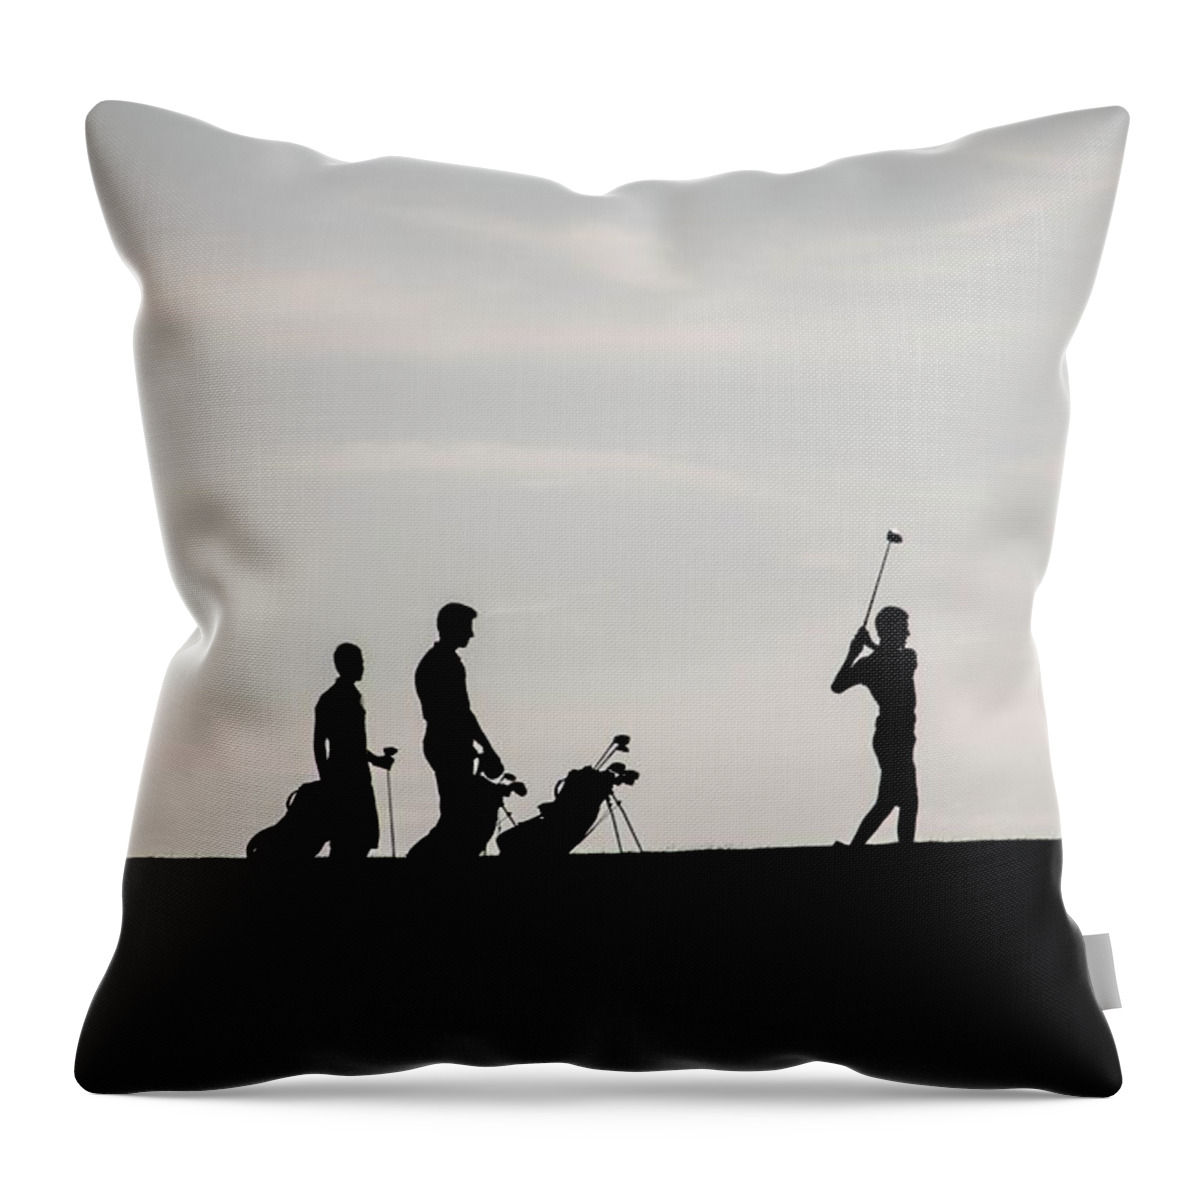 Three Quarter Length Throw Pillow featuring the photograph Golf Silhouette by Denise K Lundy